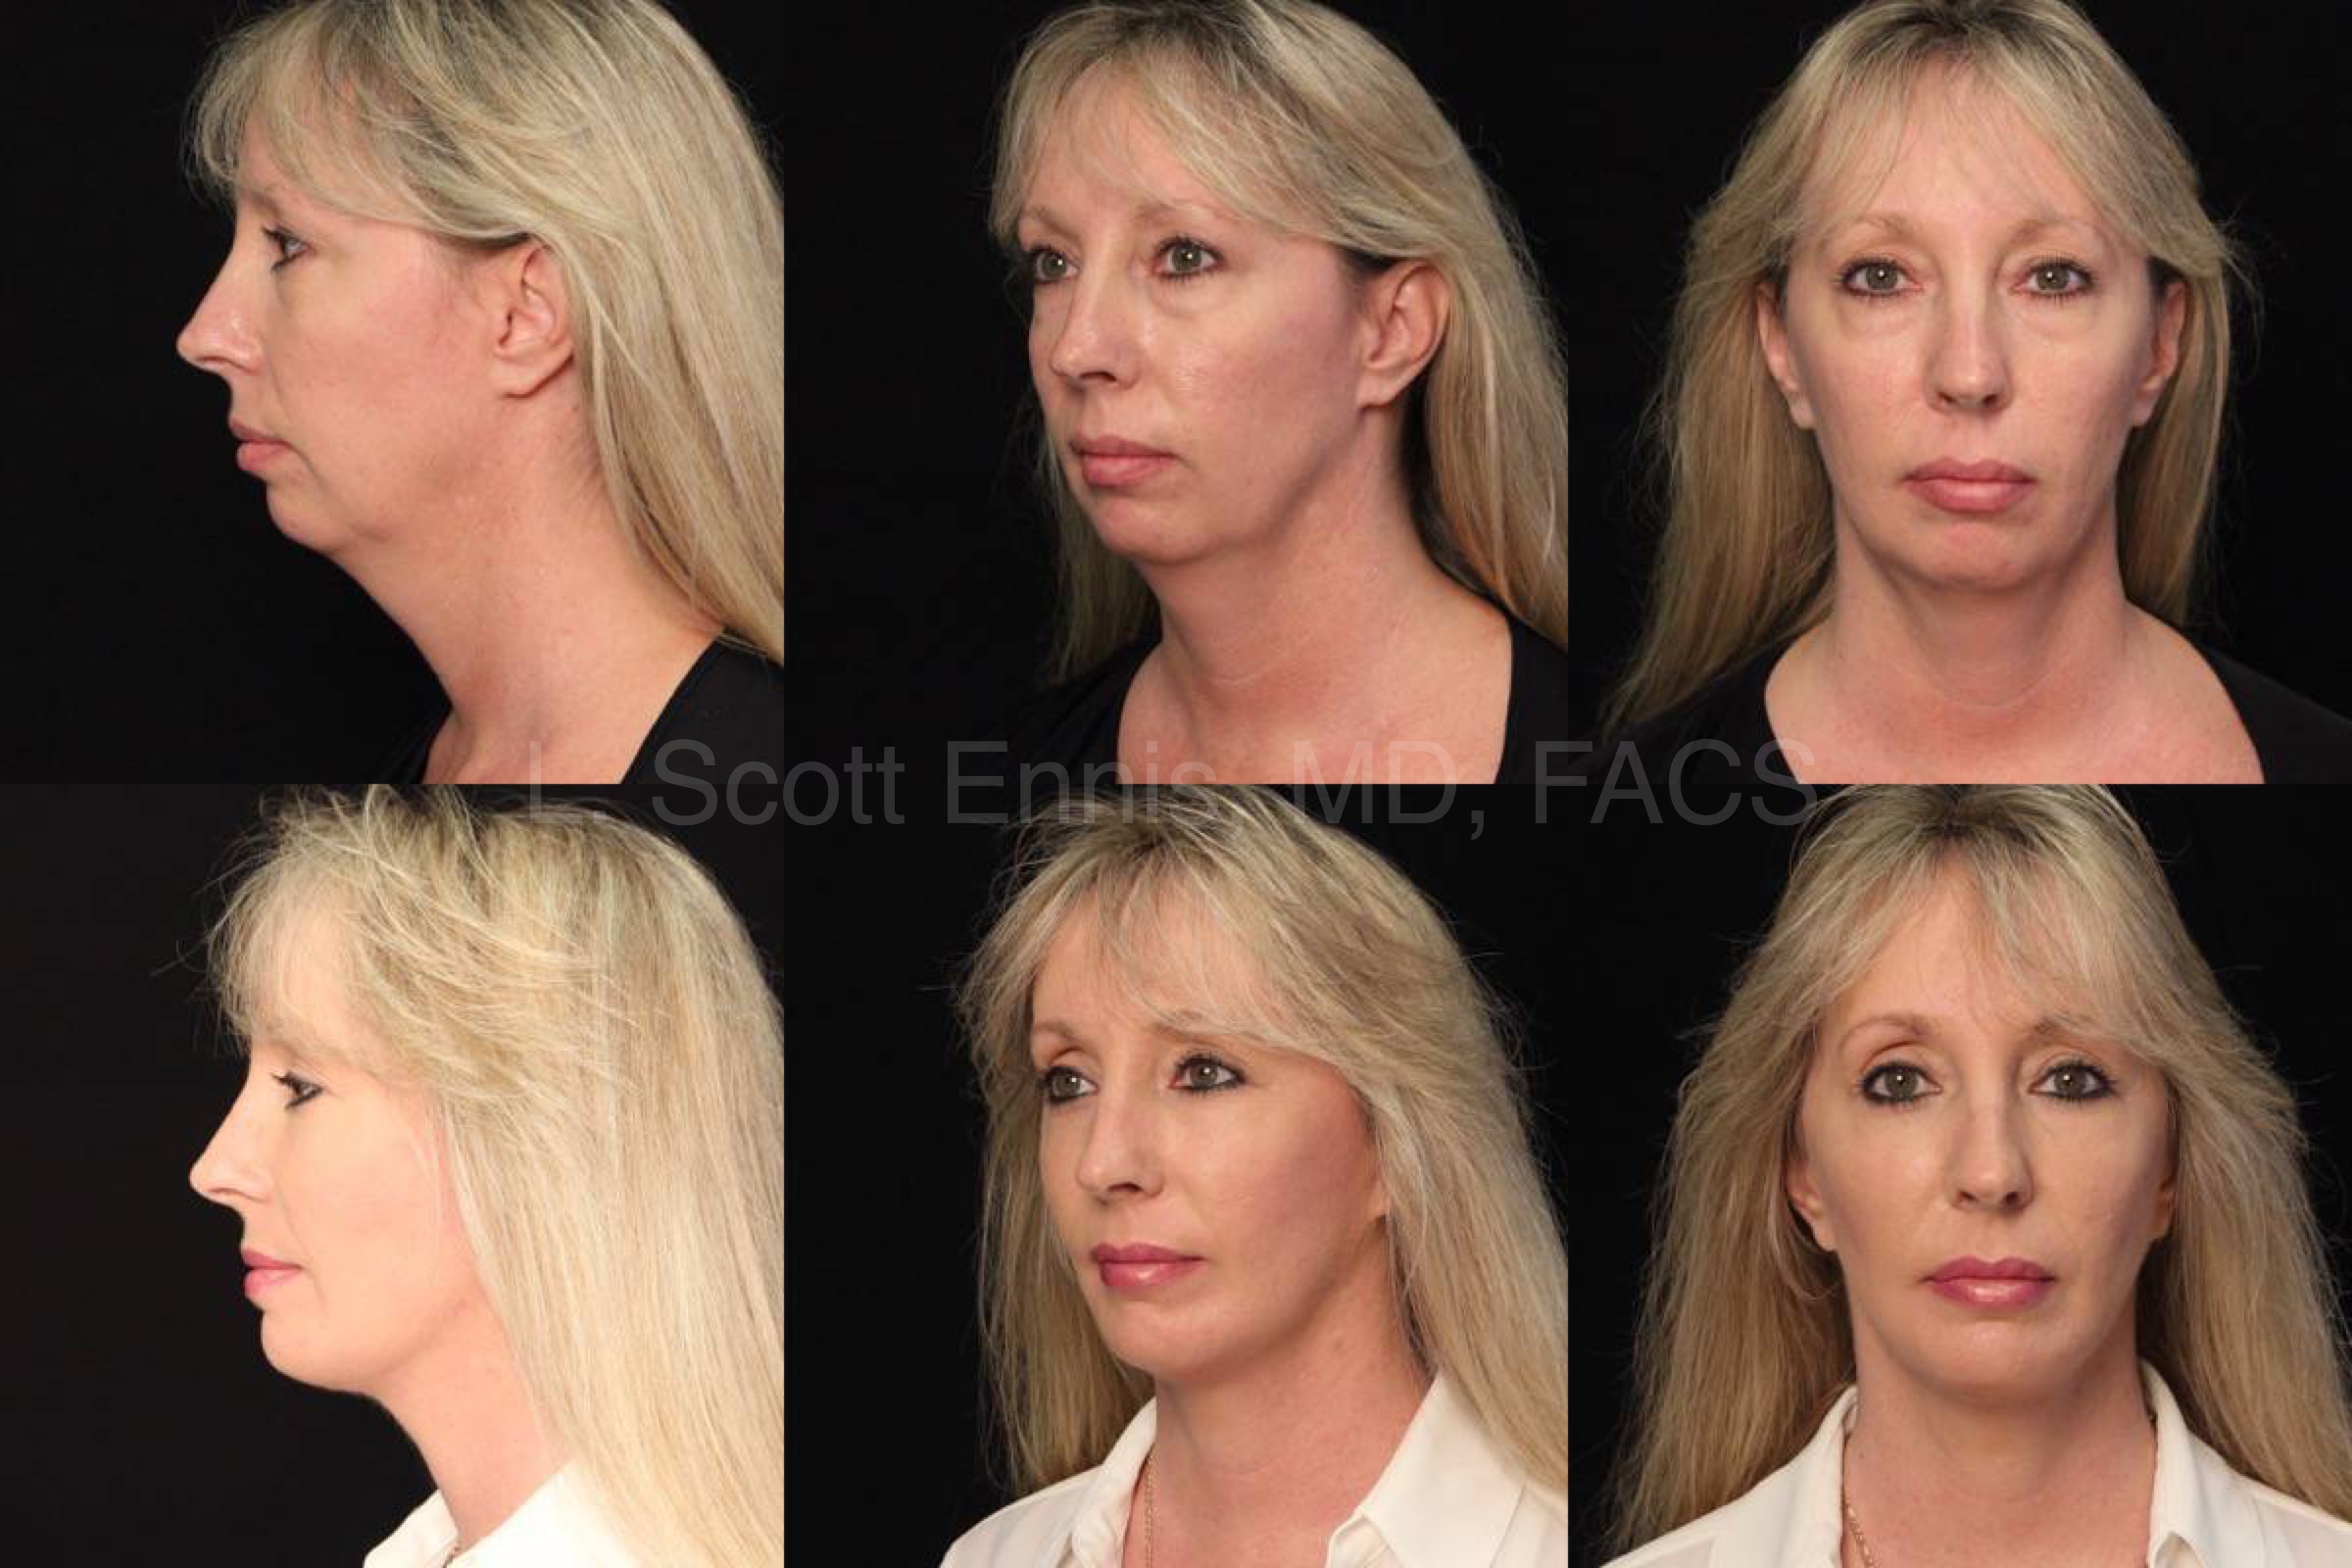 Before and After face lift eye lid lift blepheroplasty buccal fat pad removal mini chin implant Ennis Plastic Surgery Palm Beach Boca Raton Destin Miami Fort Lauderdale Florida